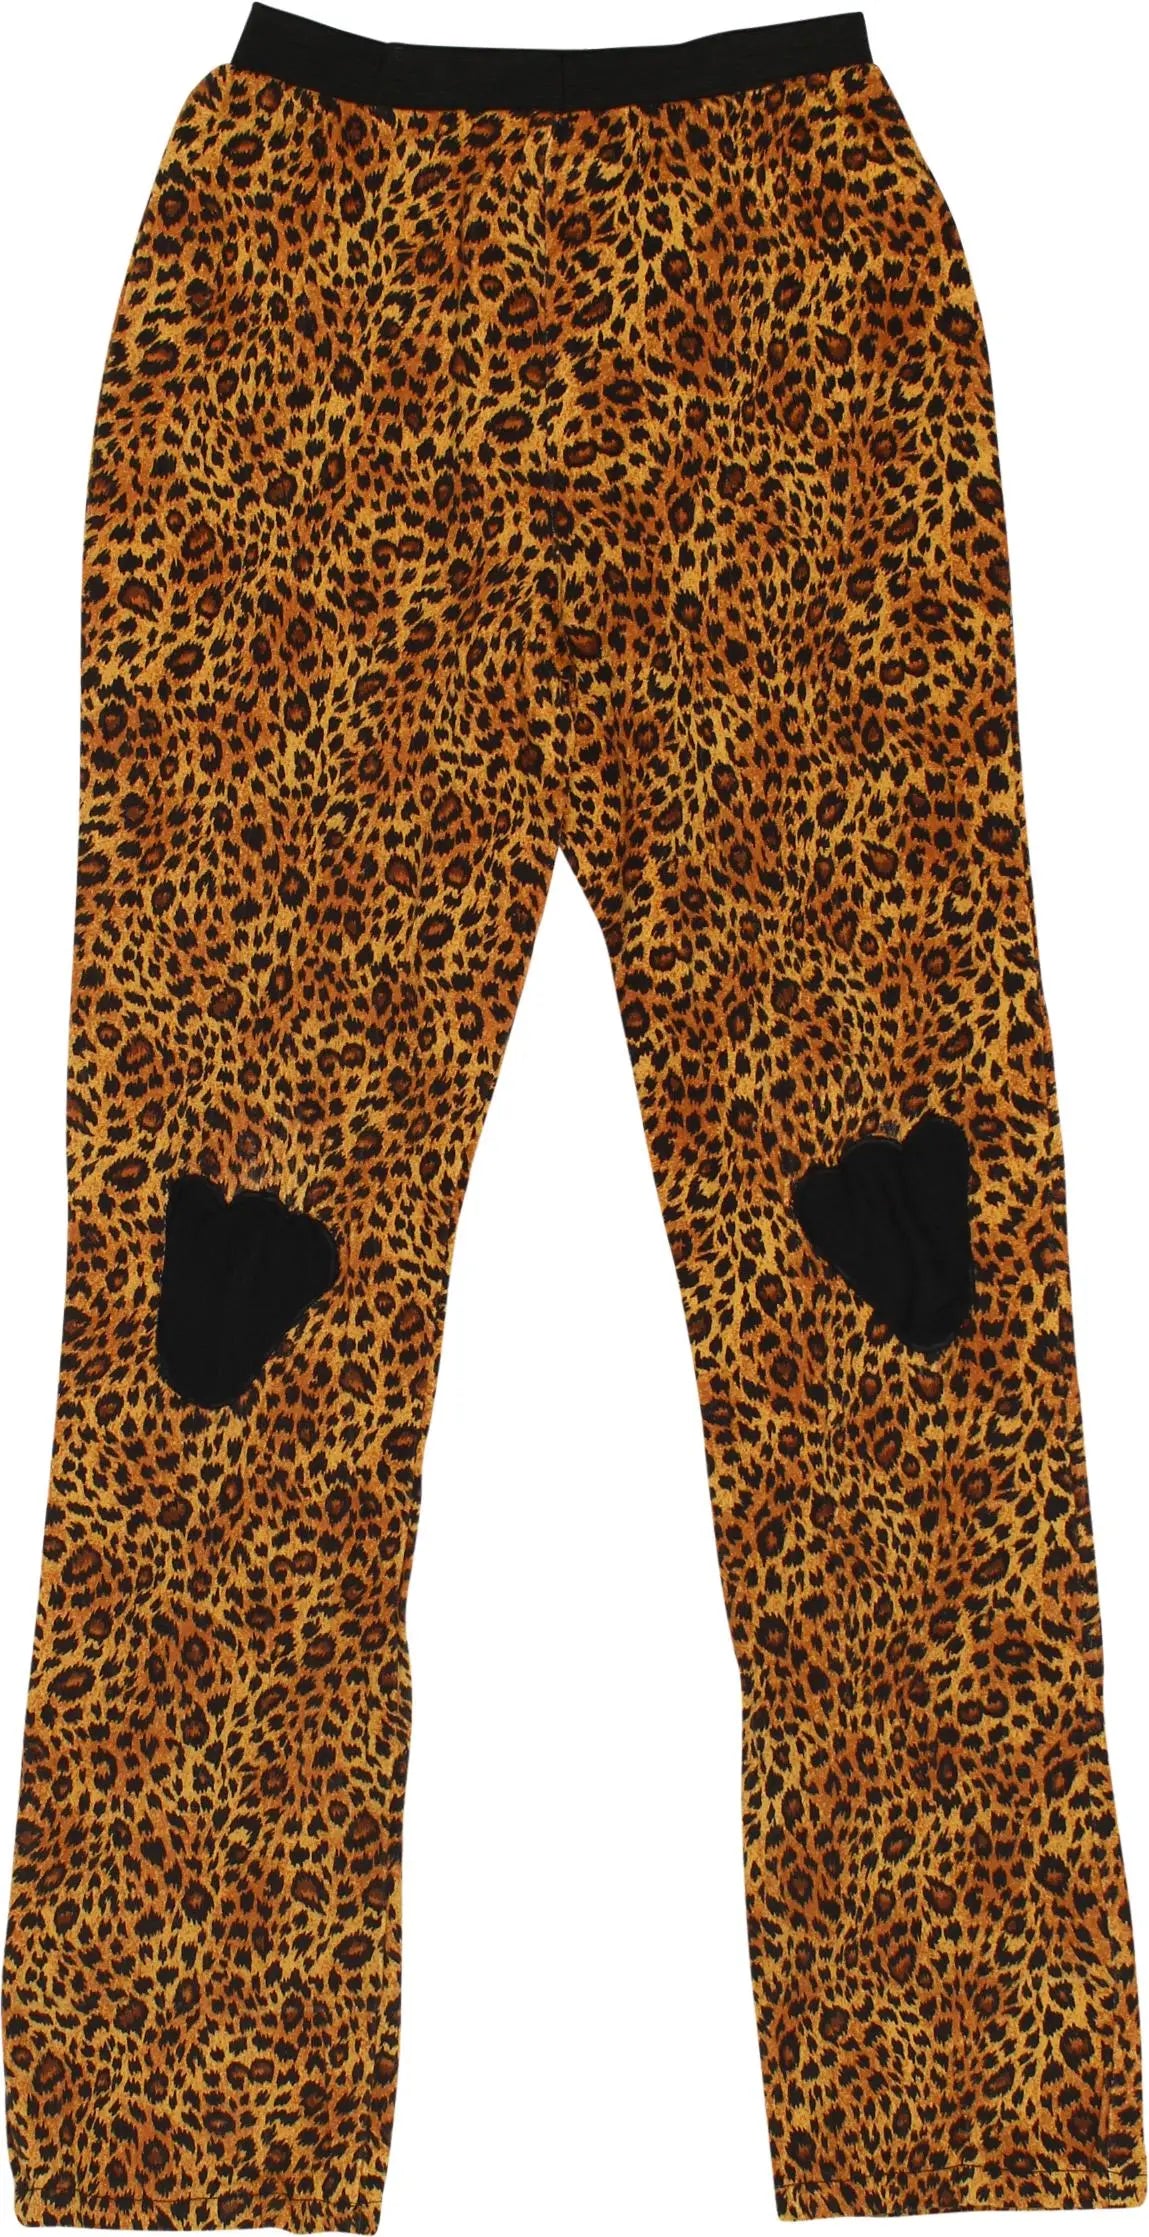 Unknown - Animal Printed Legging- ThriftTale.com - Vintage and second handclothing